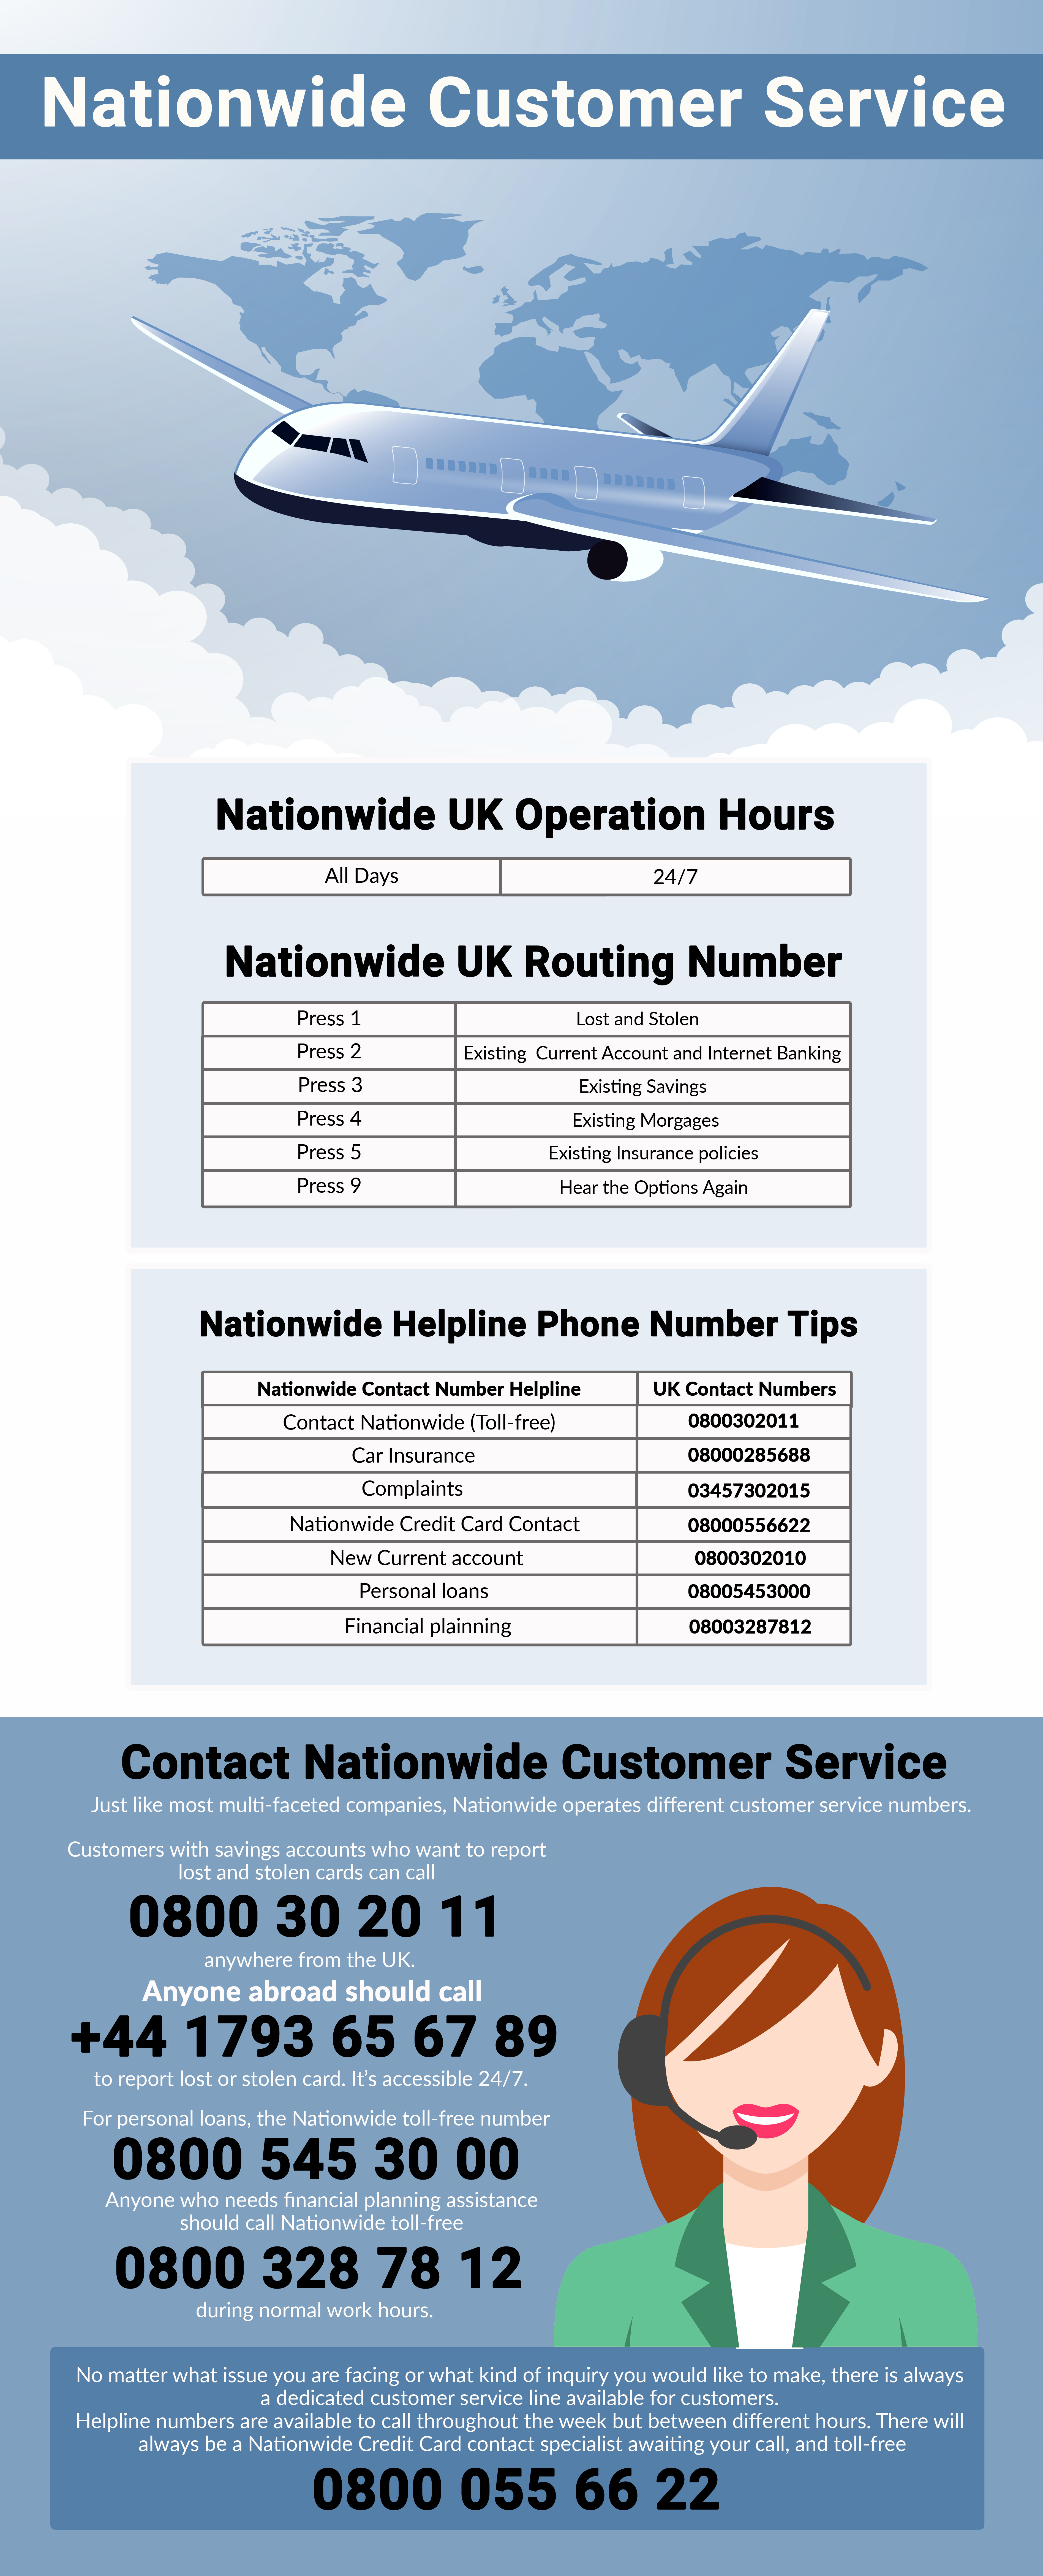 Nationwide Contact Number